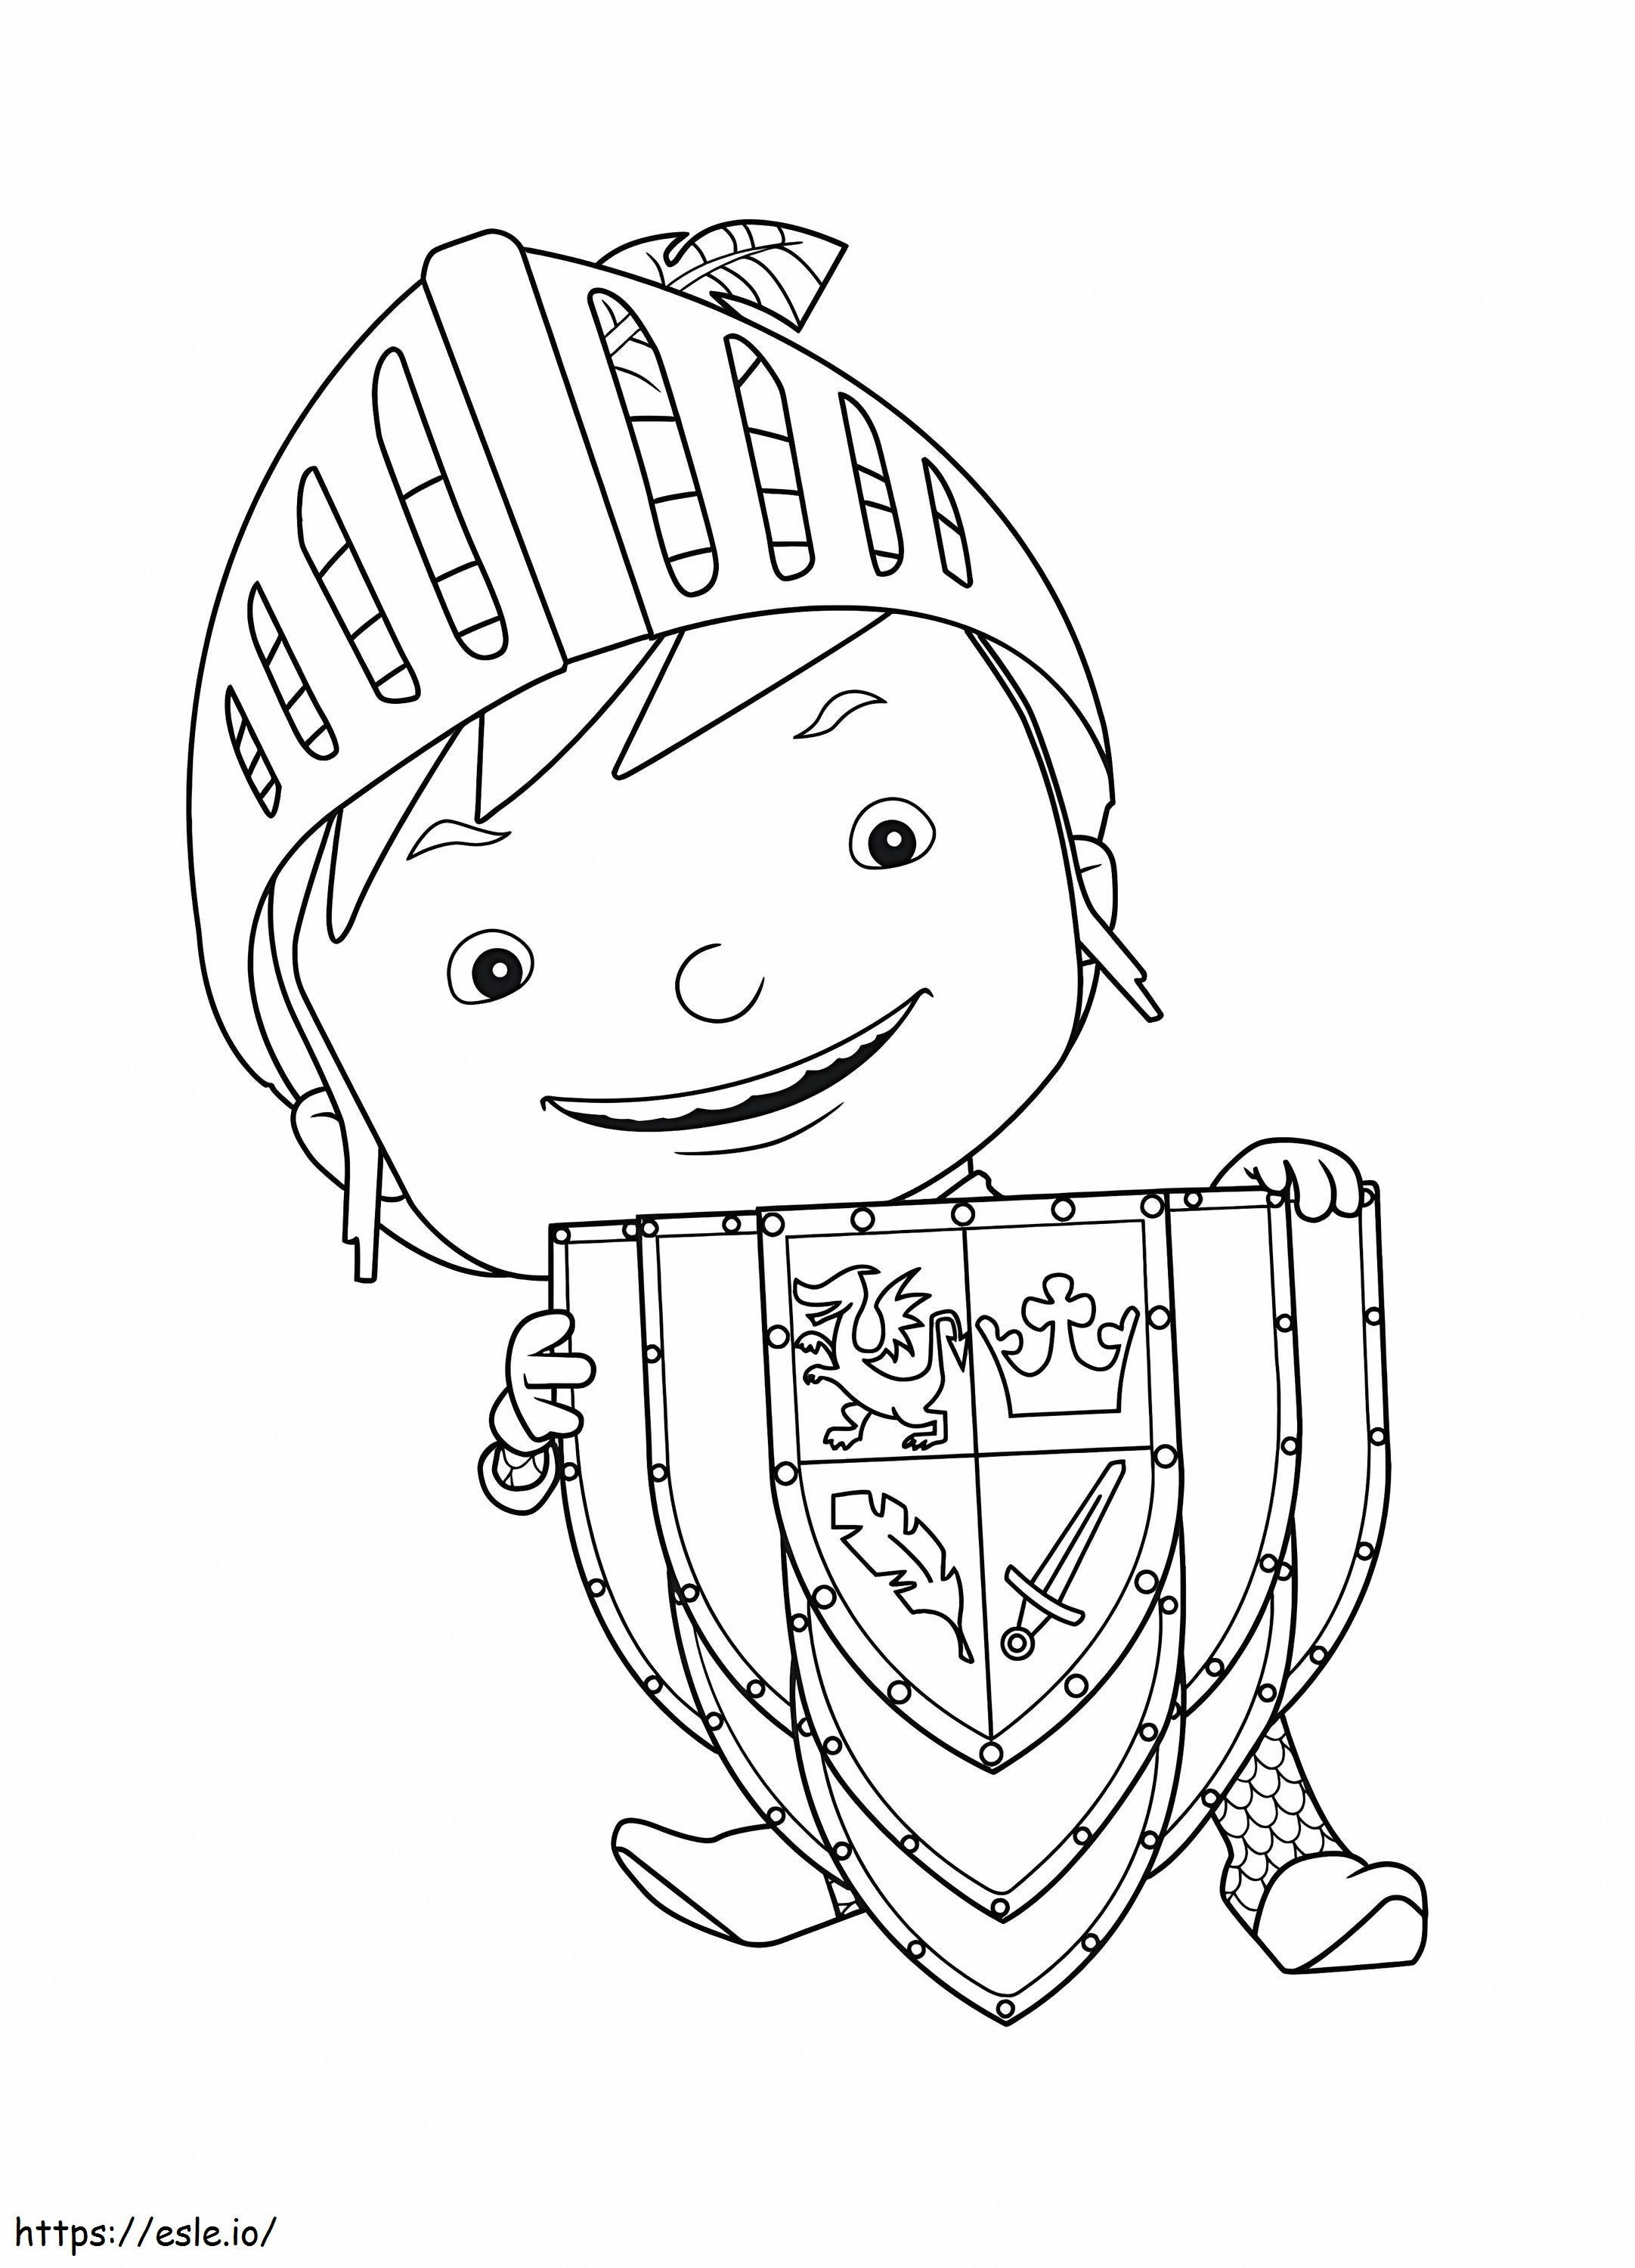 1580526446 Image006 coloring page